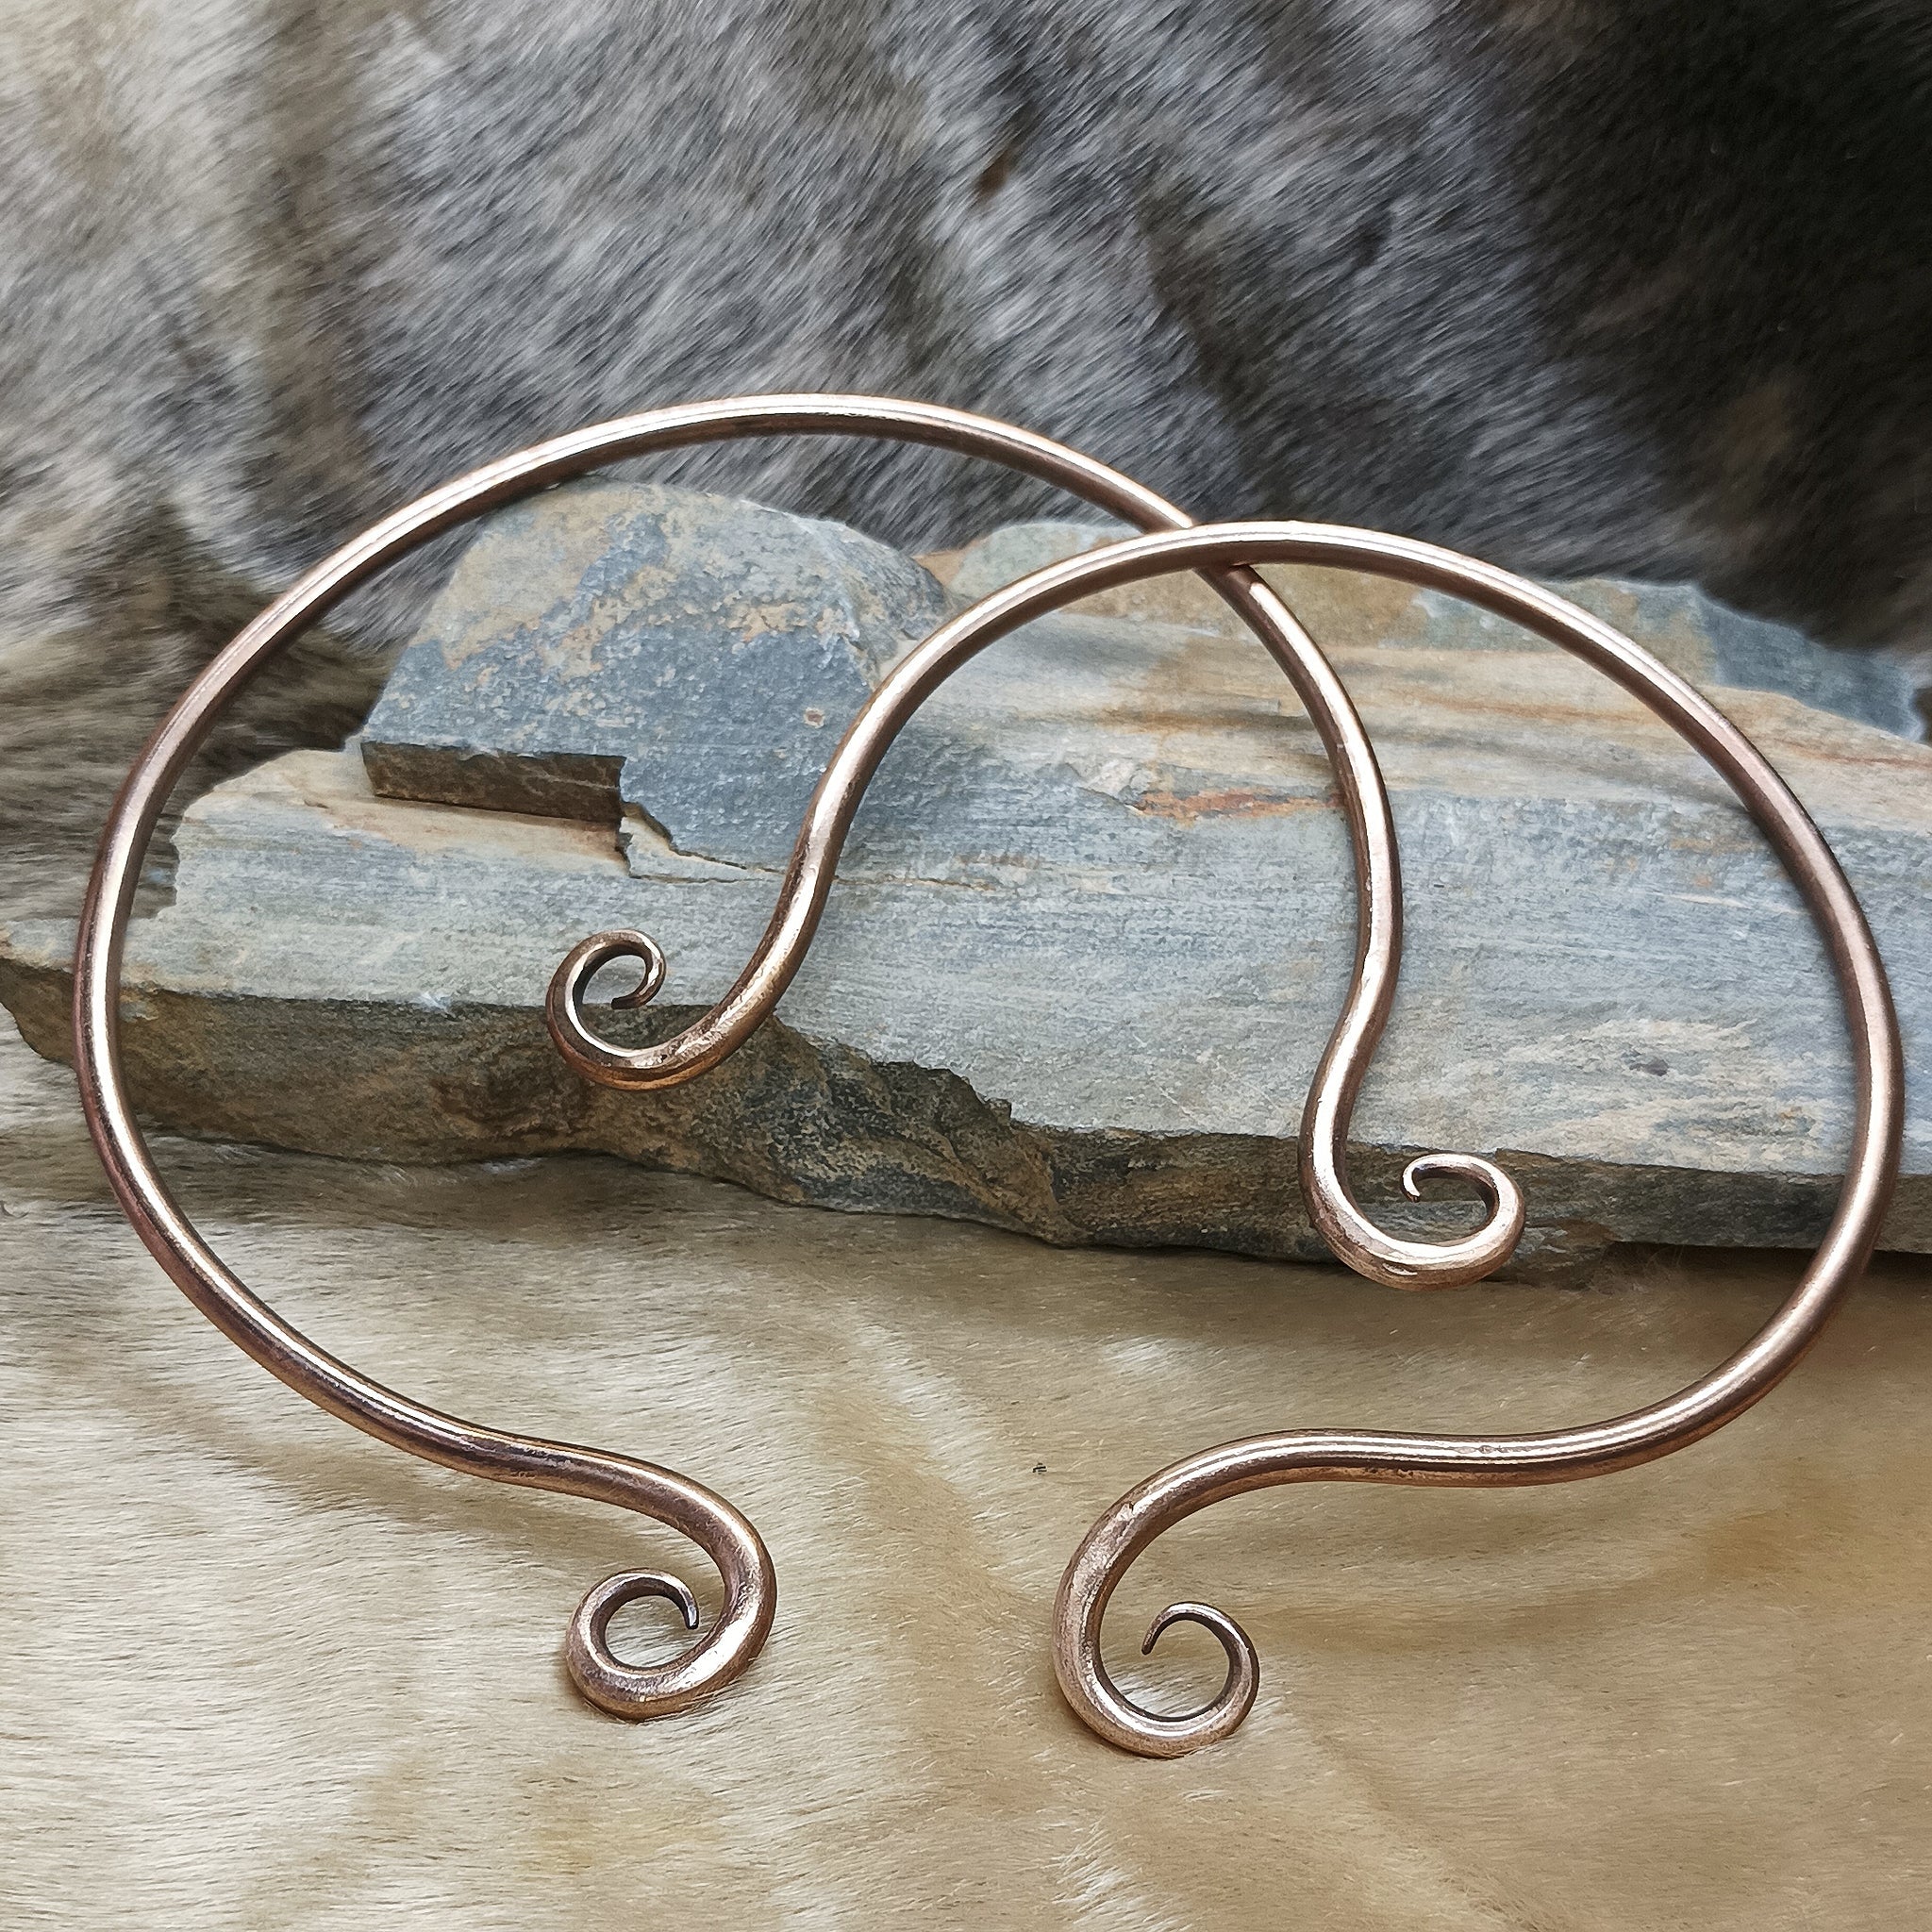 Hand-Forged Replica Viking Neck Torcs in Solid Bronze